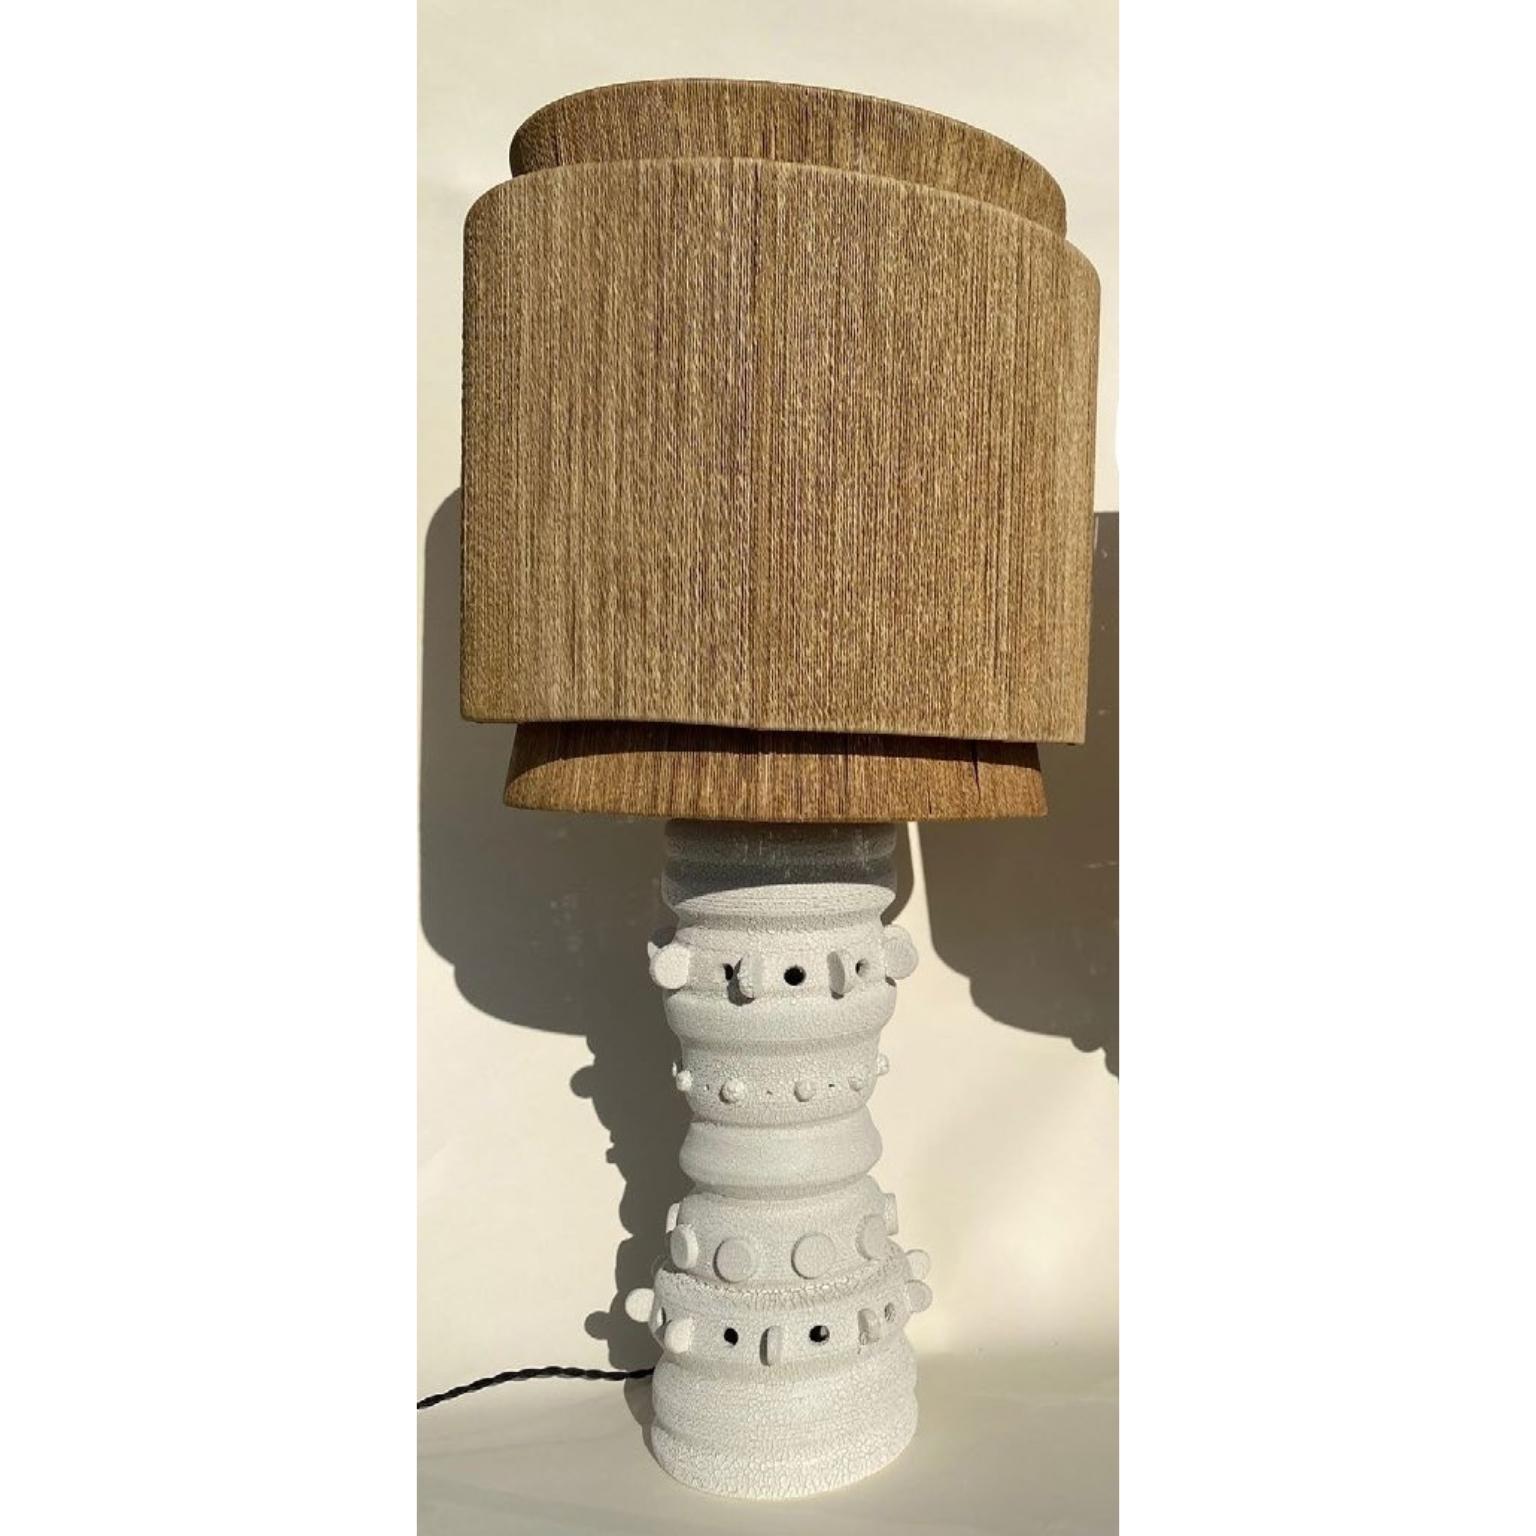 Ceramic lamp by Olivia Cognet
Materials: ceramic
Dimensions: H 45 cm 

Each of Olivia’s handmade creations is a unique work of art, the snapshot of a precious moment captured in a world of fast ‘everything’.
Since moving to Los Angeles in 2016,